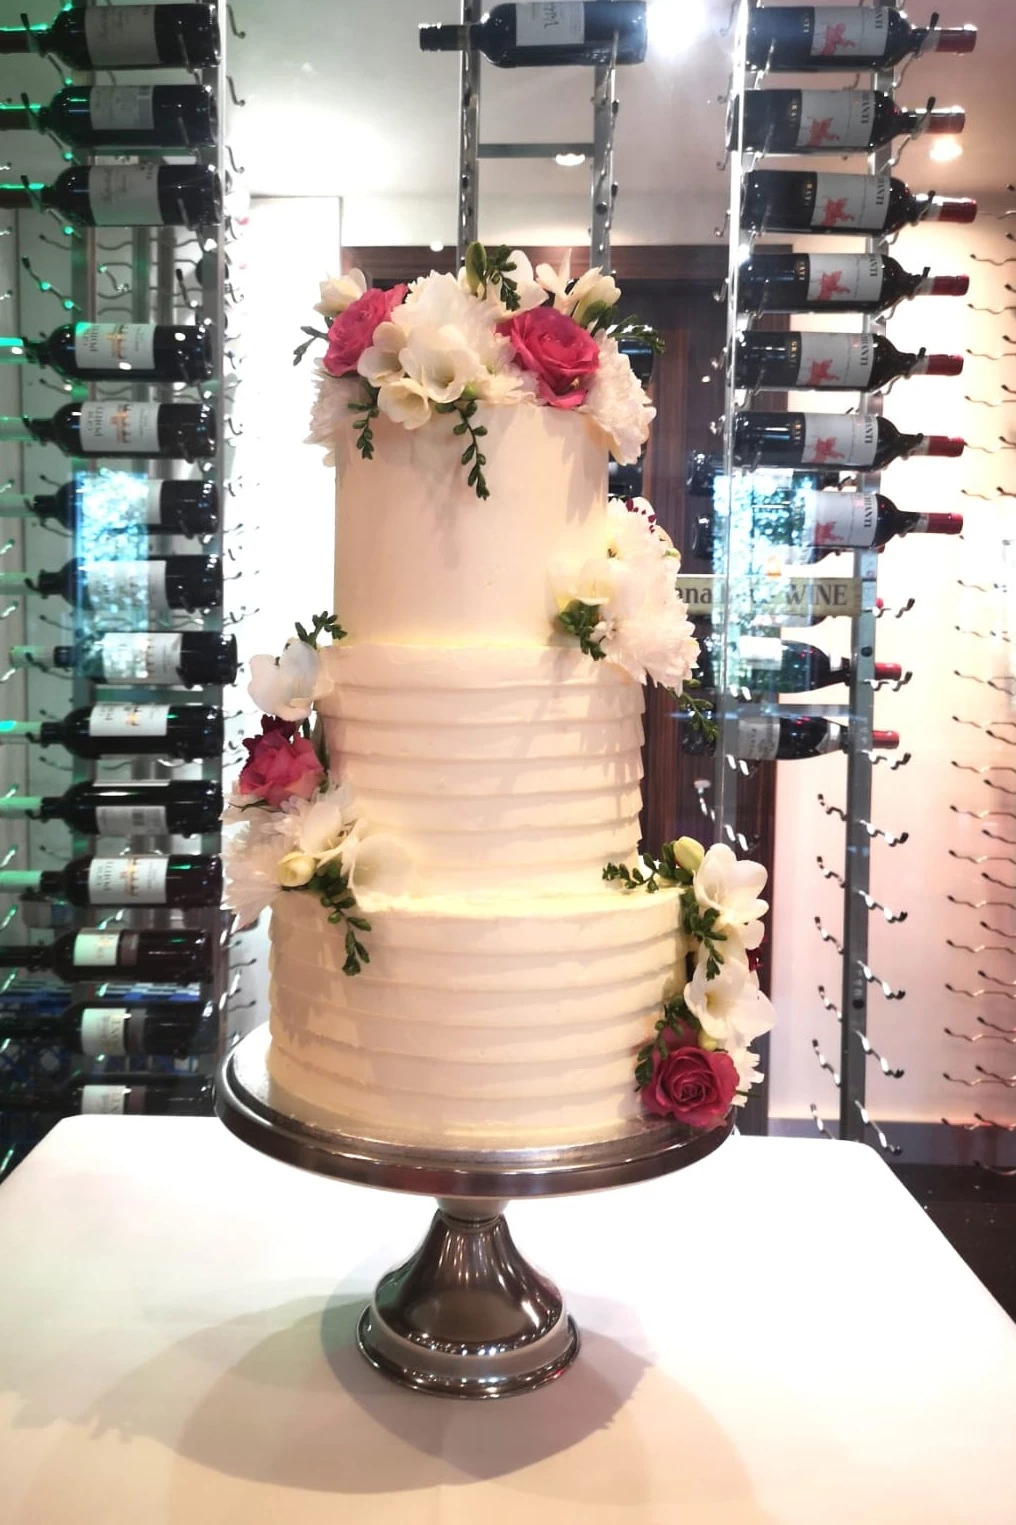 A Tall Wedding Cake for a Small Wedding but the rest of the cake can be frozen for later